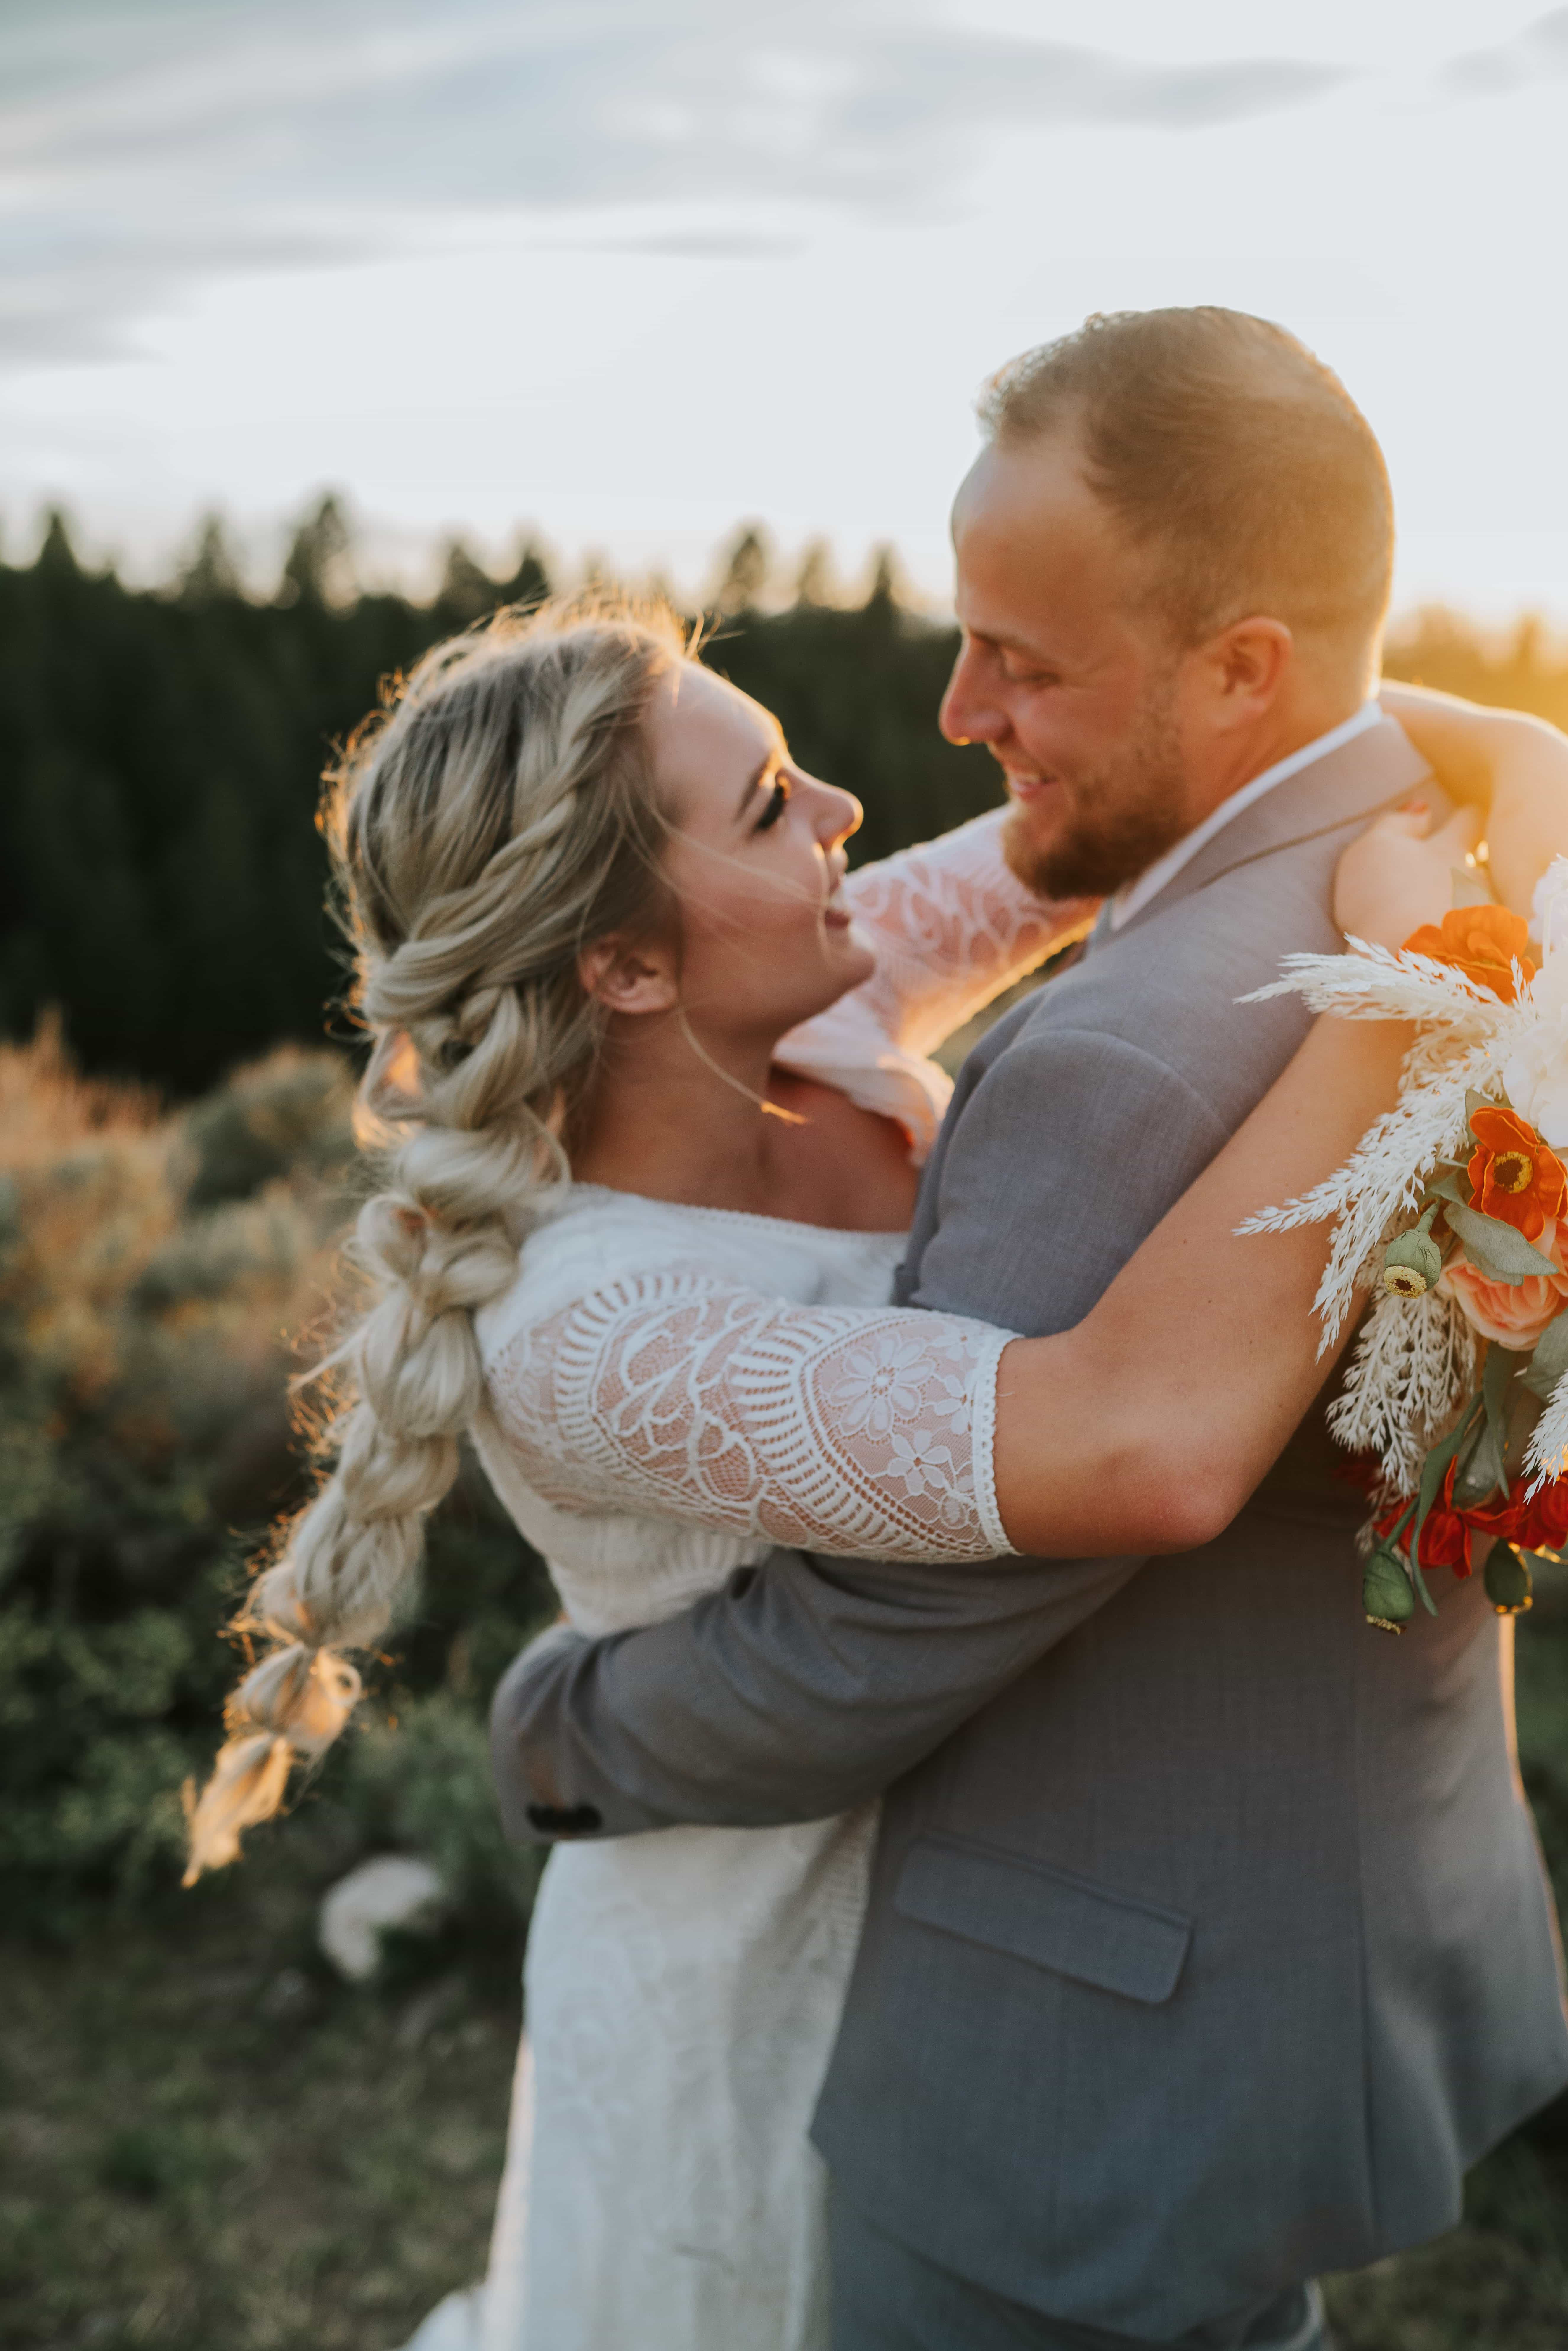 Sacramento wedding photographer captures bride and groom outside embracing while holding her flowers after choosing knoxville wedding planners for their day